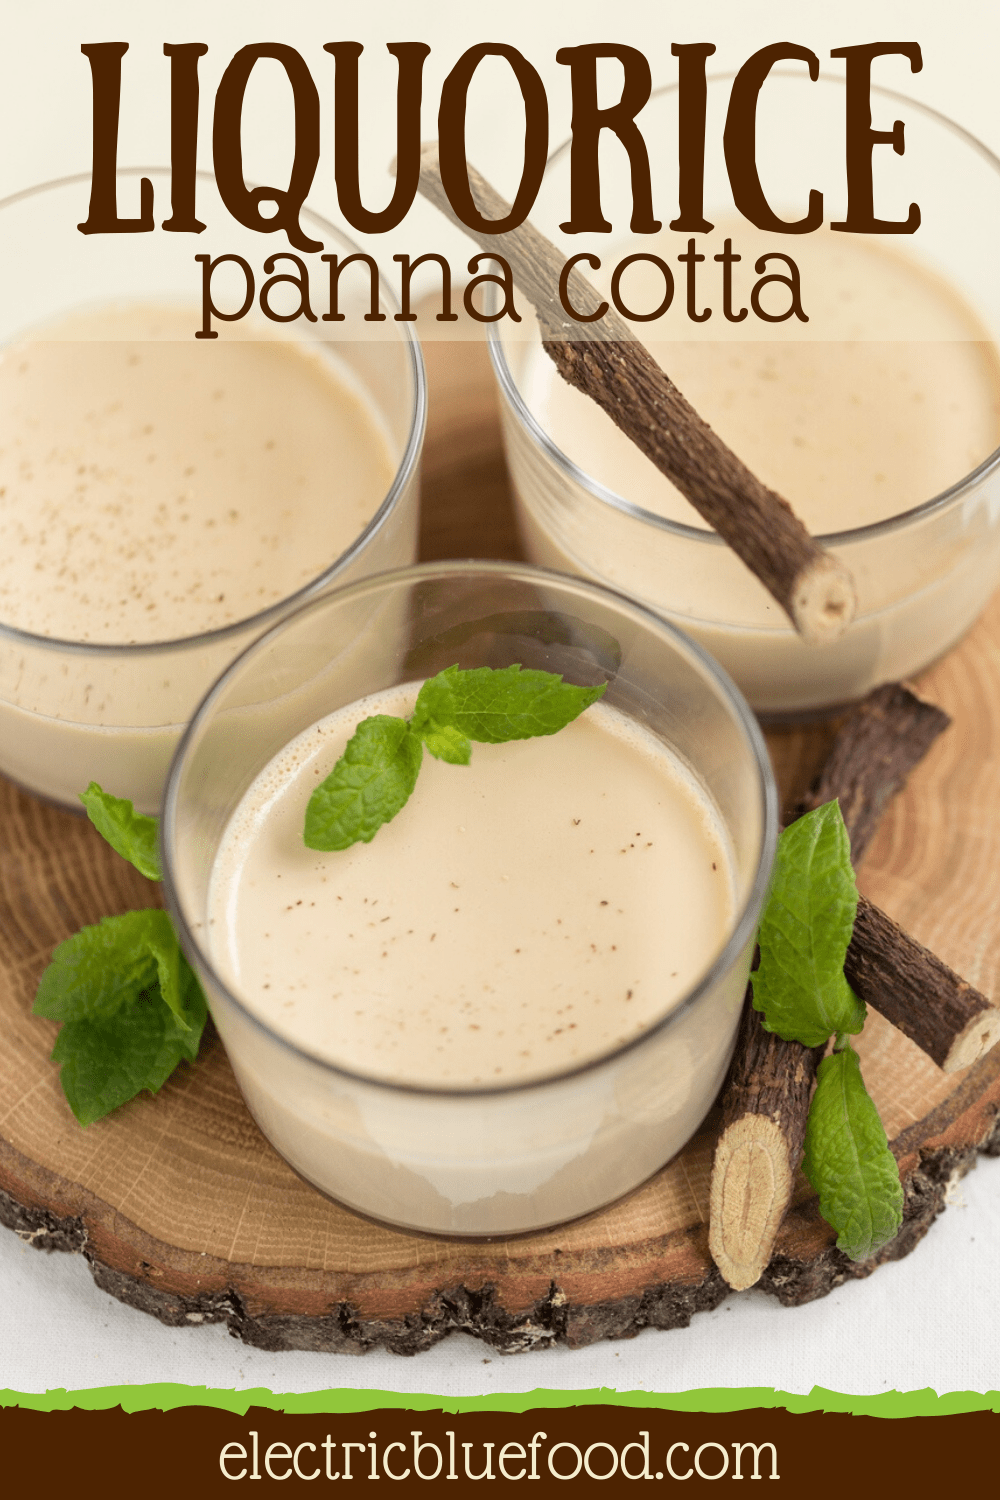 Liquorice panna cotta made with real liquorice extract. A peculiar flavour twist to a classic dessert recipe.